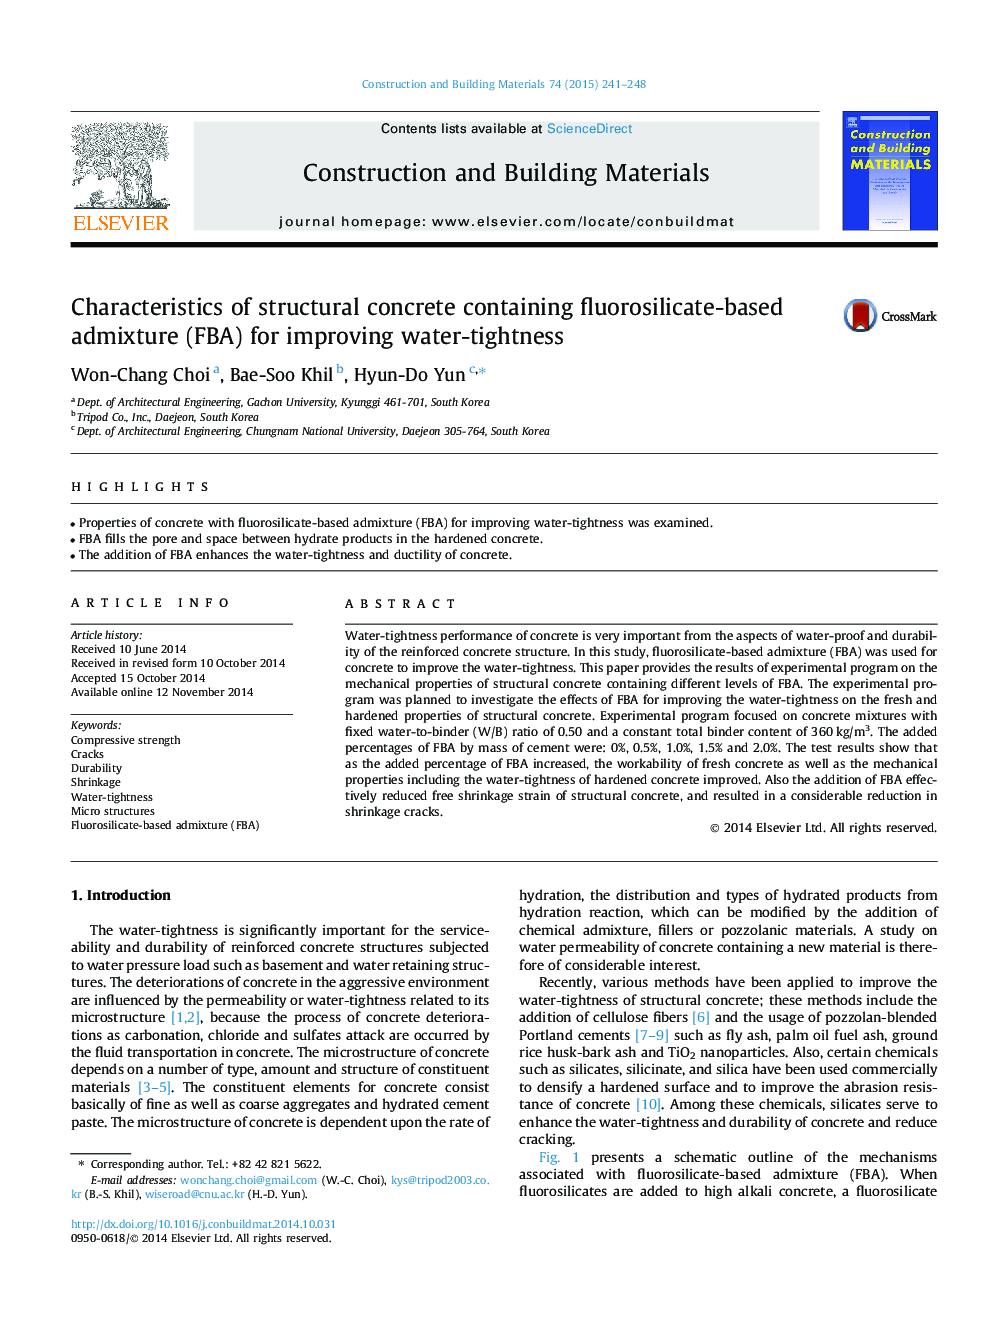 Characteristics of structural concrete containing fluorosilicate-based admixture (FBA) for improving water-tightness